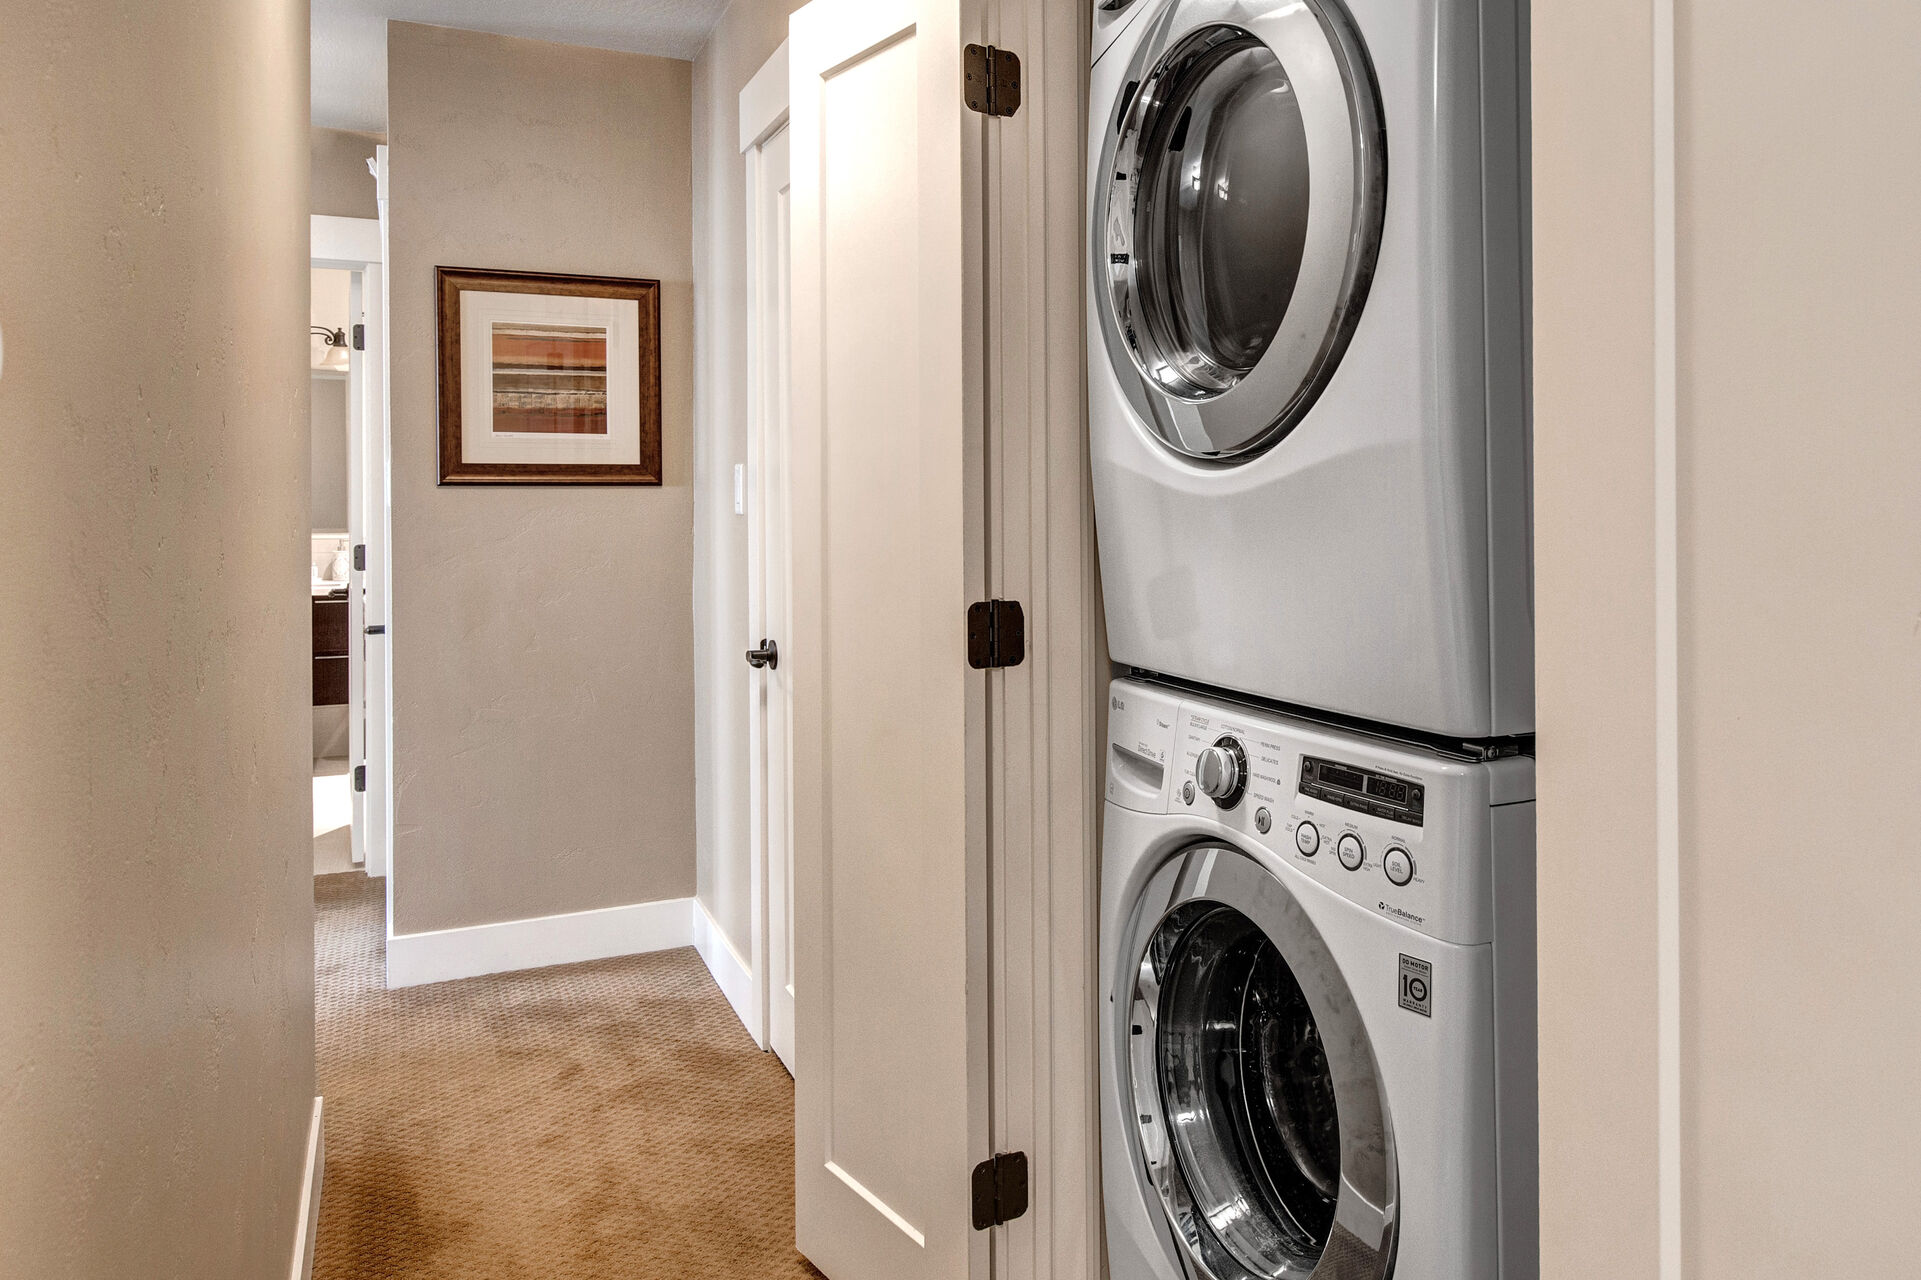 Private stackable laundry unit in hallway closet